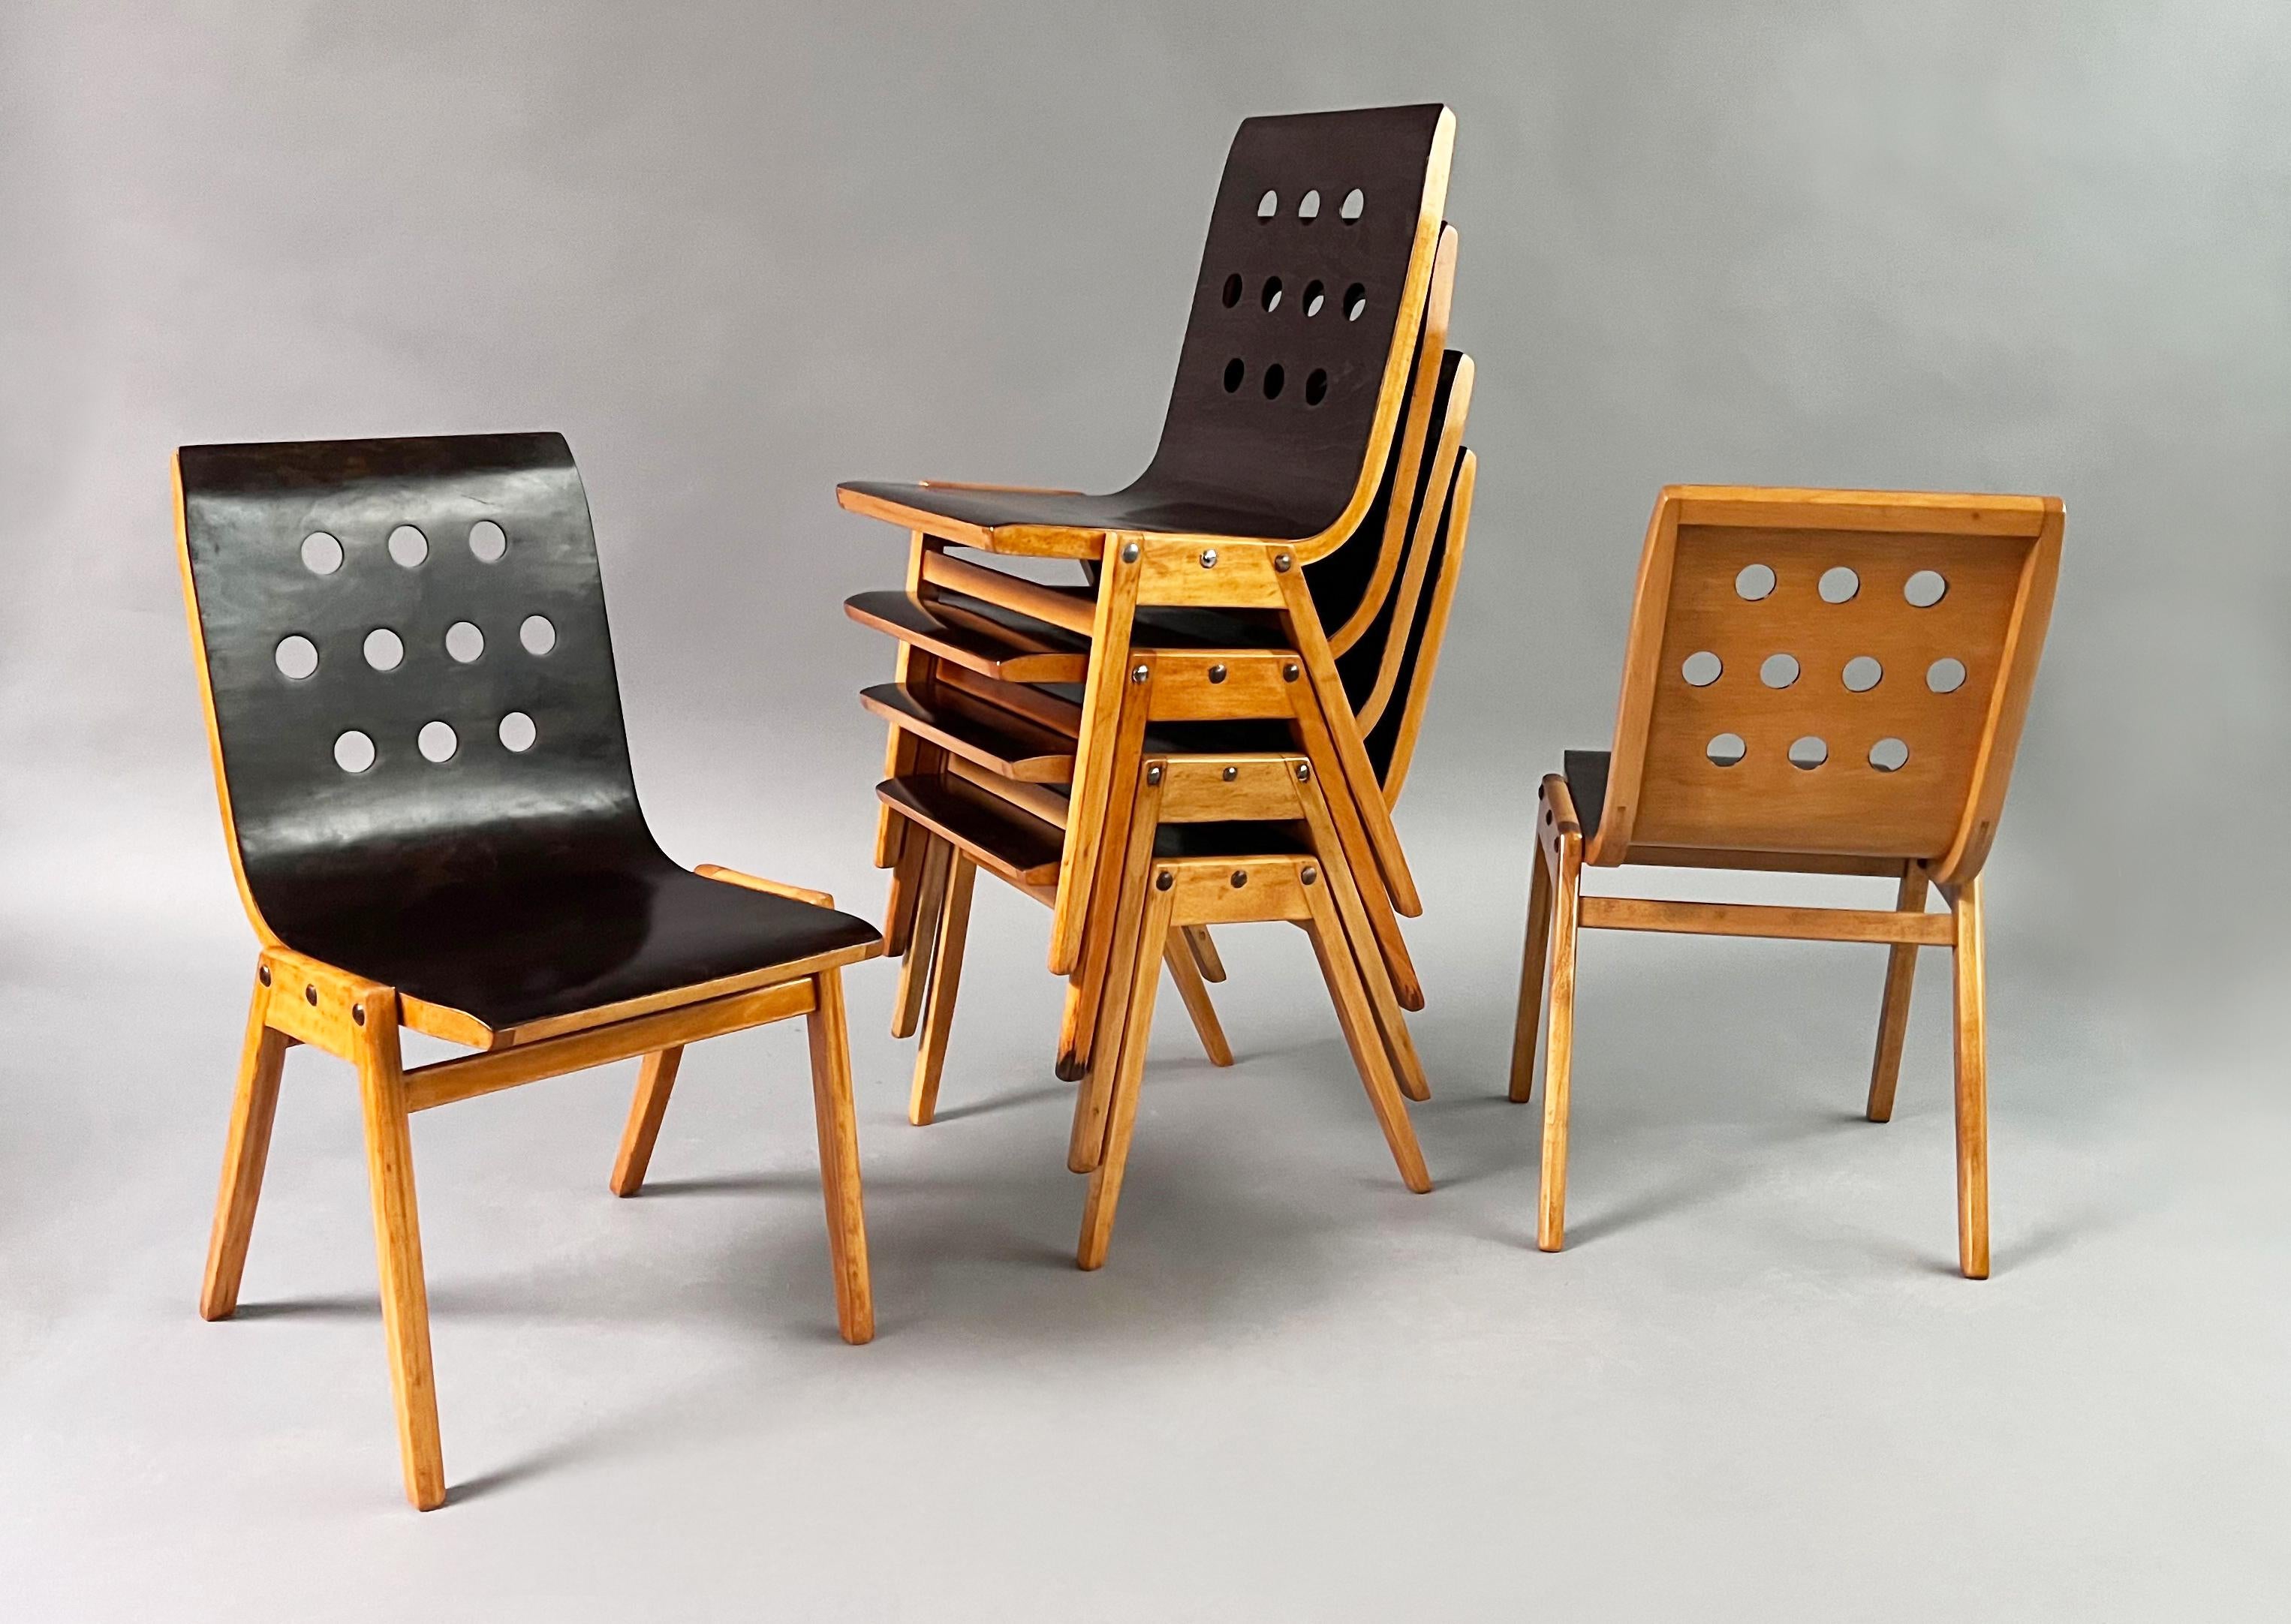 ten stacking chairs,
Roland Rainer for the Vienna city hall
Vienna, 1952
Bentwood.